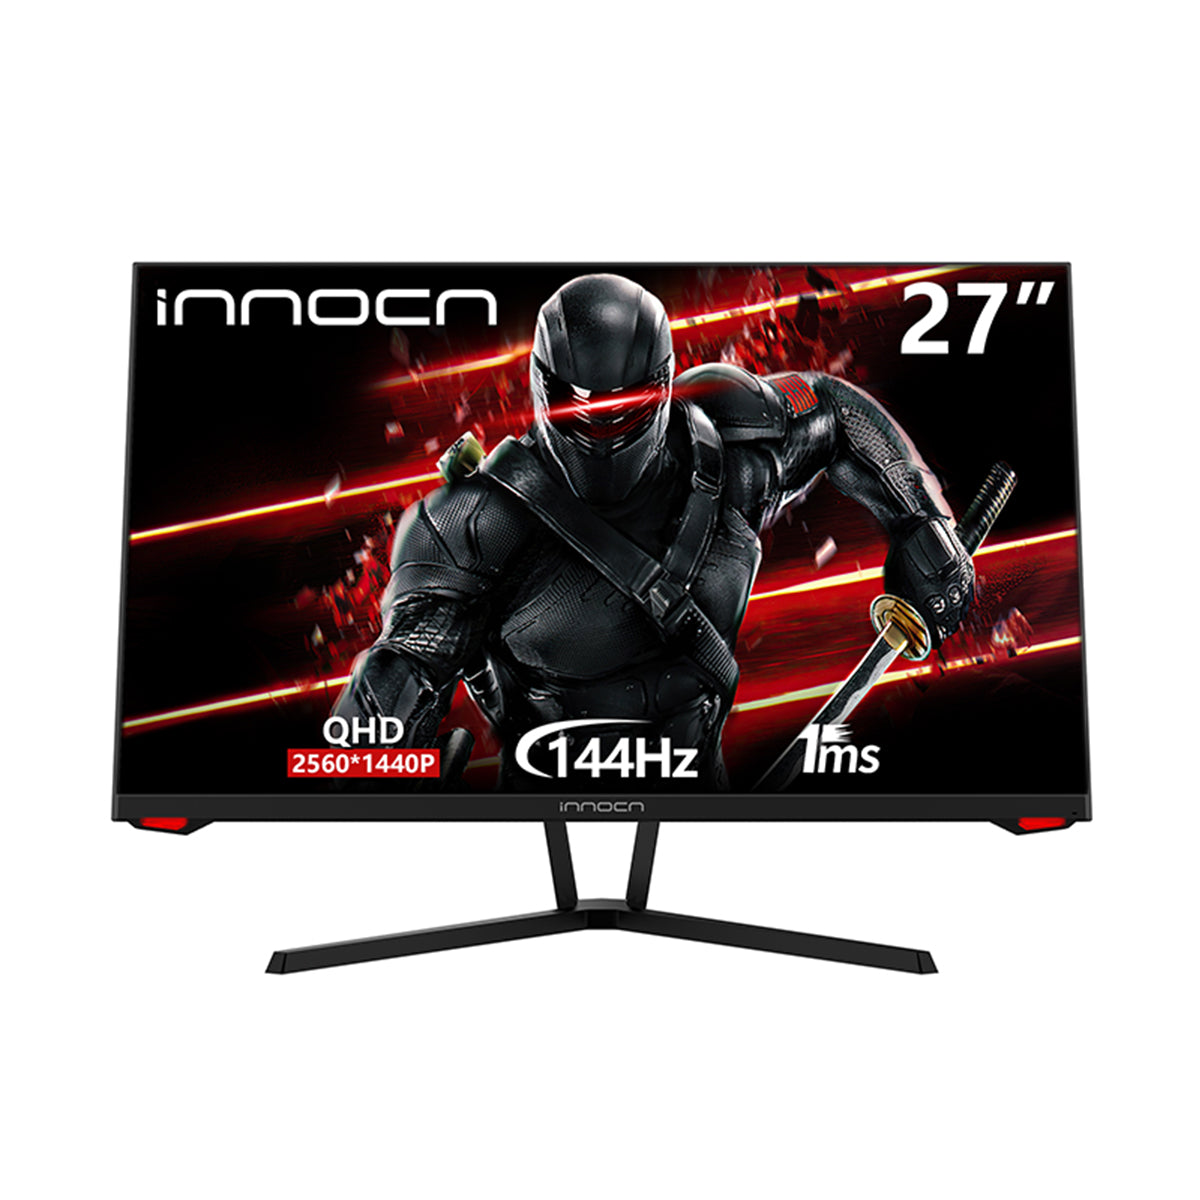 INNOCN's 27-inch beast of a gaming monitor is $120 off